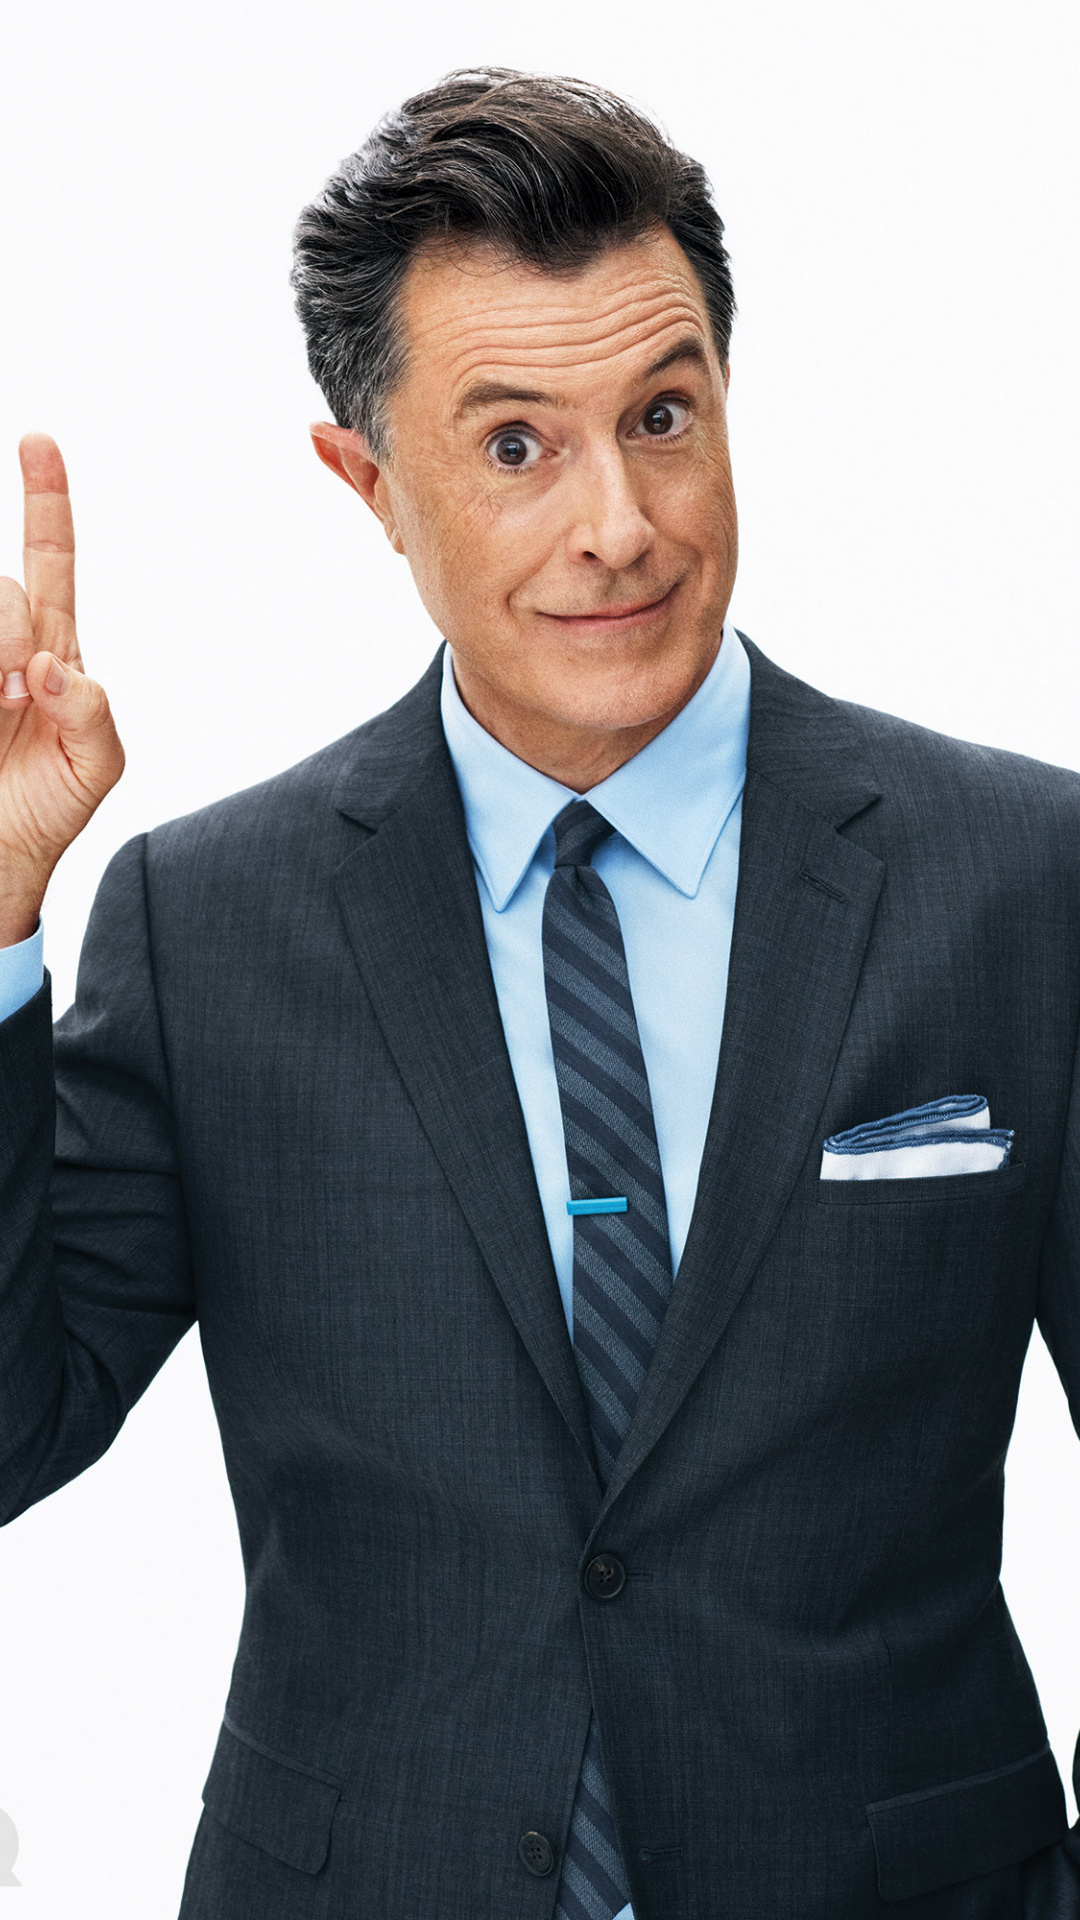 HD wallpaper, Stephen Colbert Wallpapers High Resolution, Celebrity Portraits, Quality Download, Samsung Full Hd Stephen Colbert Background, 1080X1920 Full Hd Phone, Stephen Curry Crossover